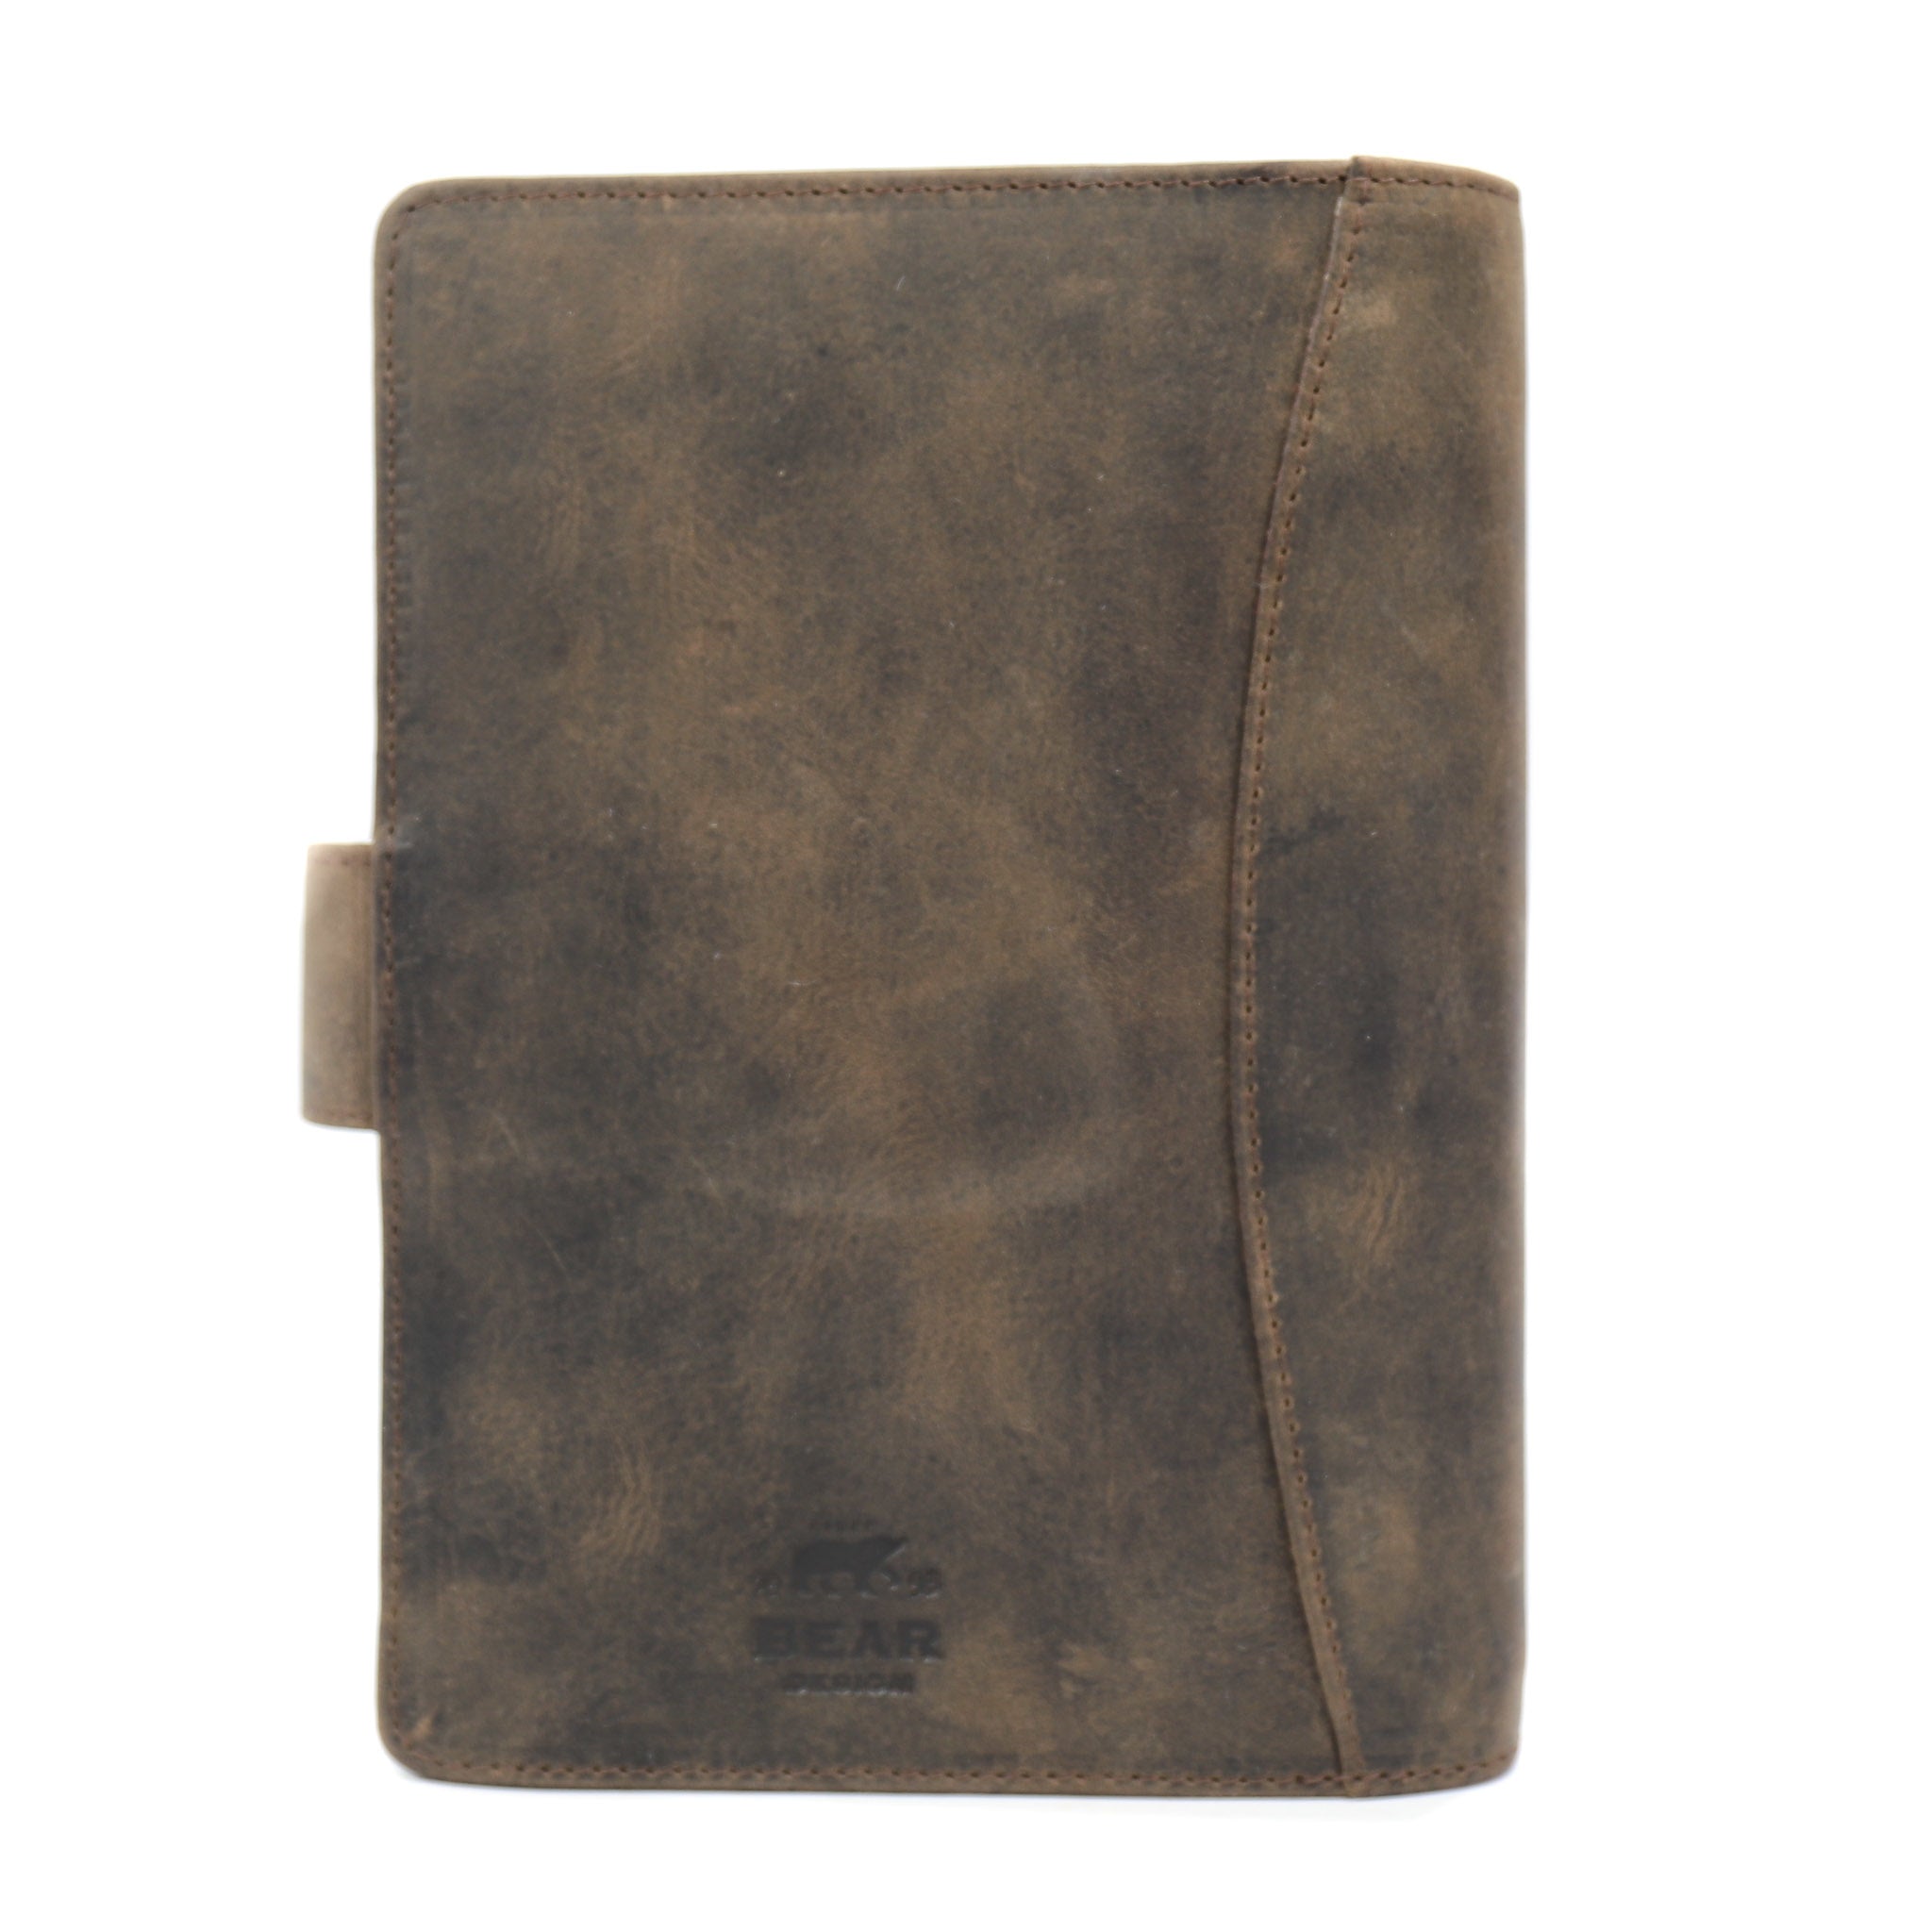 Large cover diary 'René' brown - HD 8338